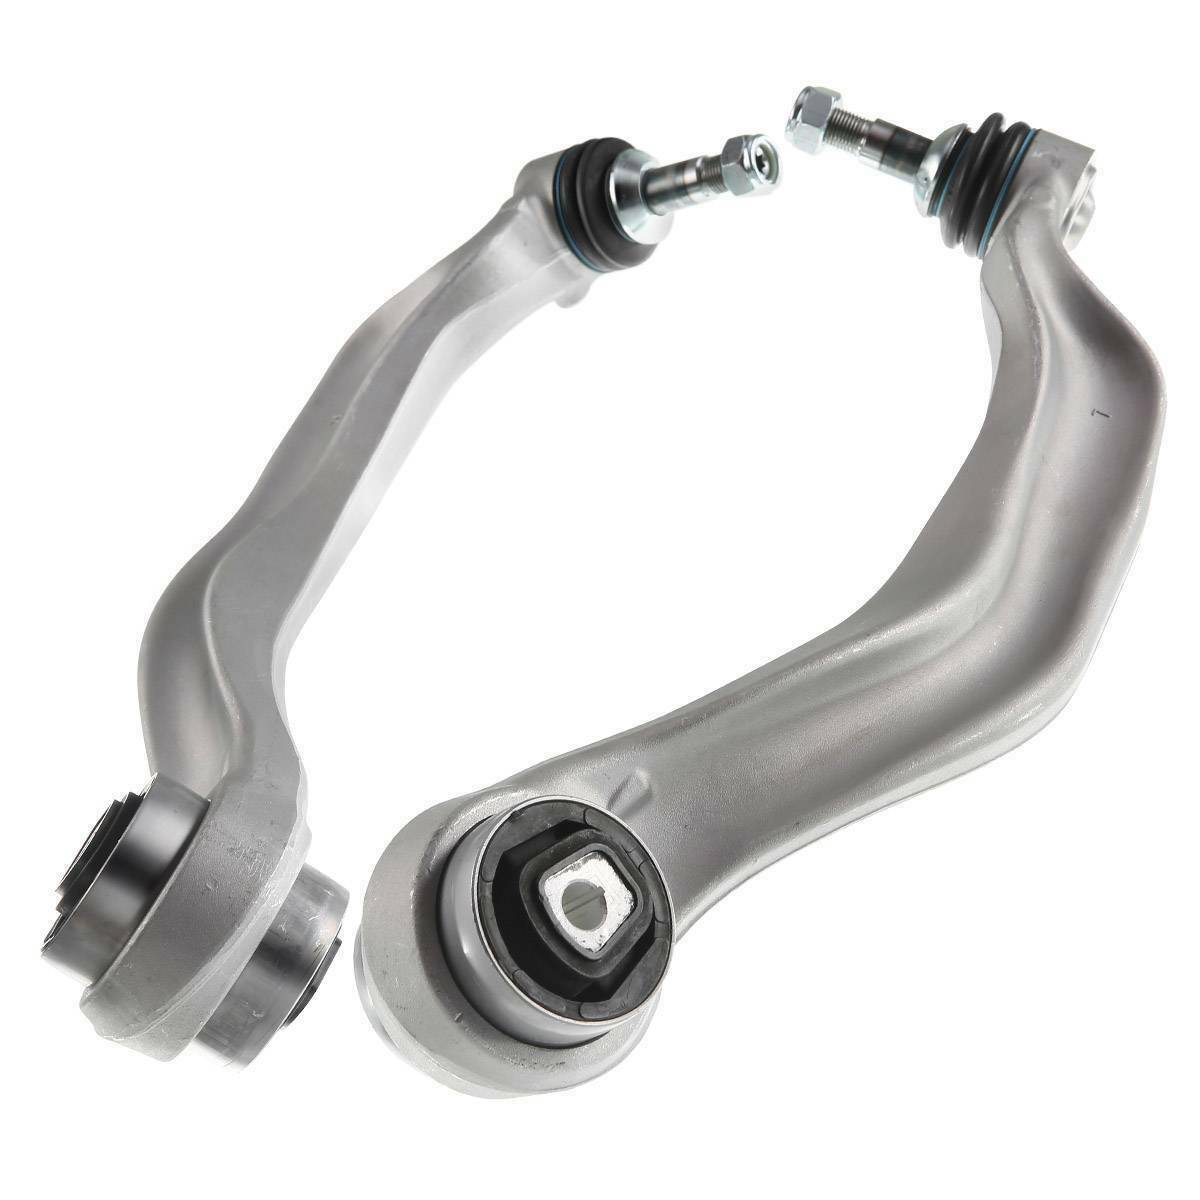 2x Front LH & RH Lower Control Arms for BMW 535i 550i GT xDrive 740Ld Alpina B7